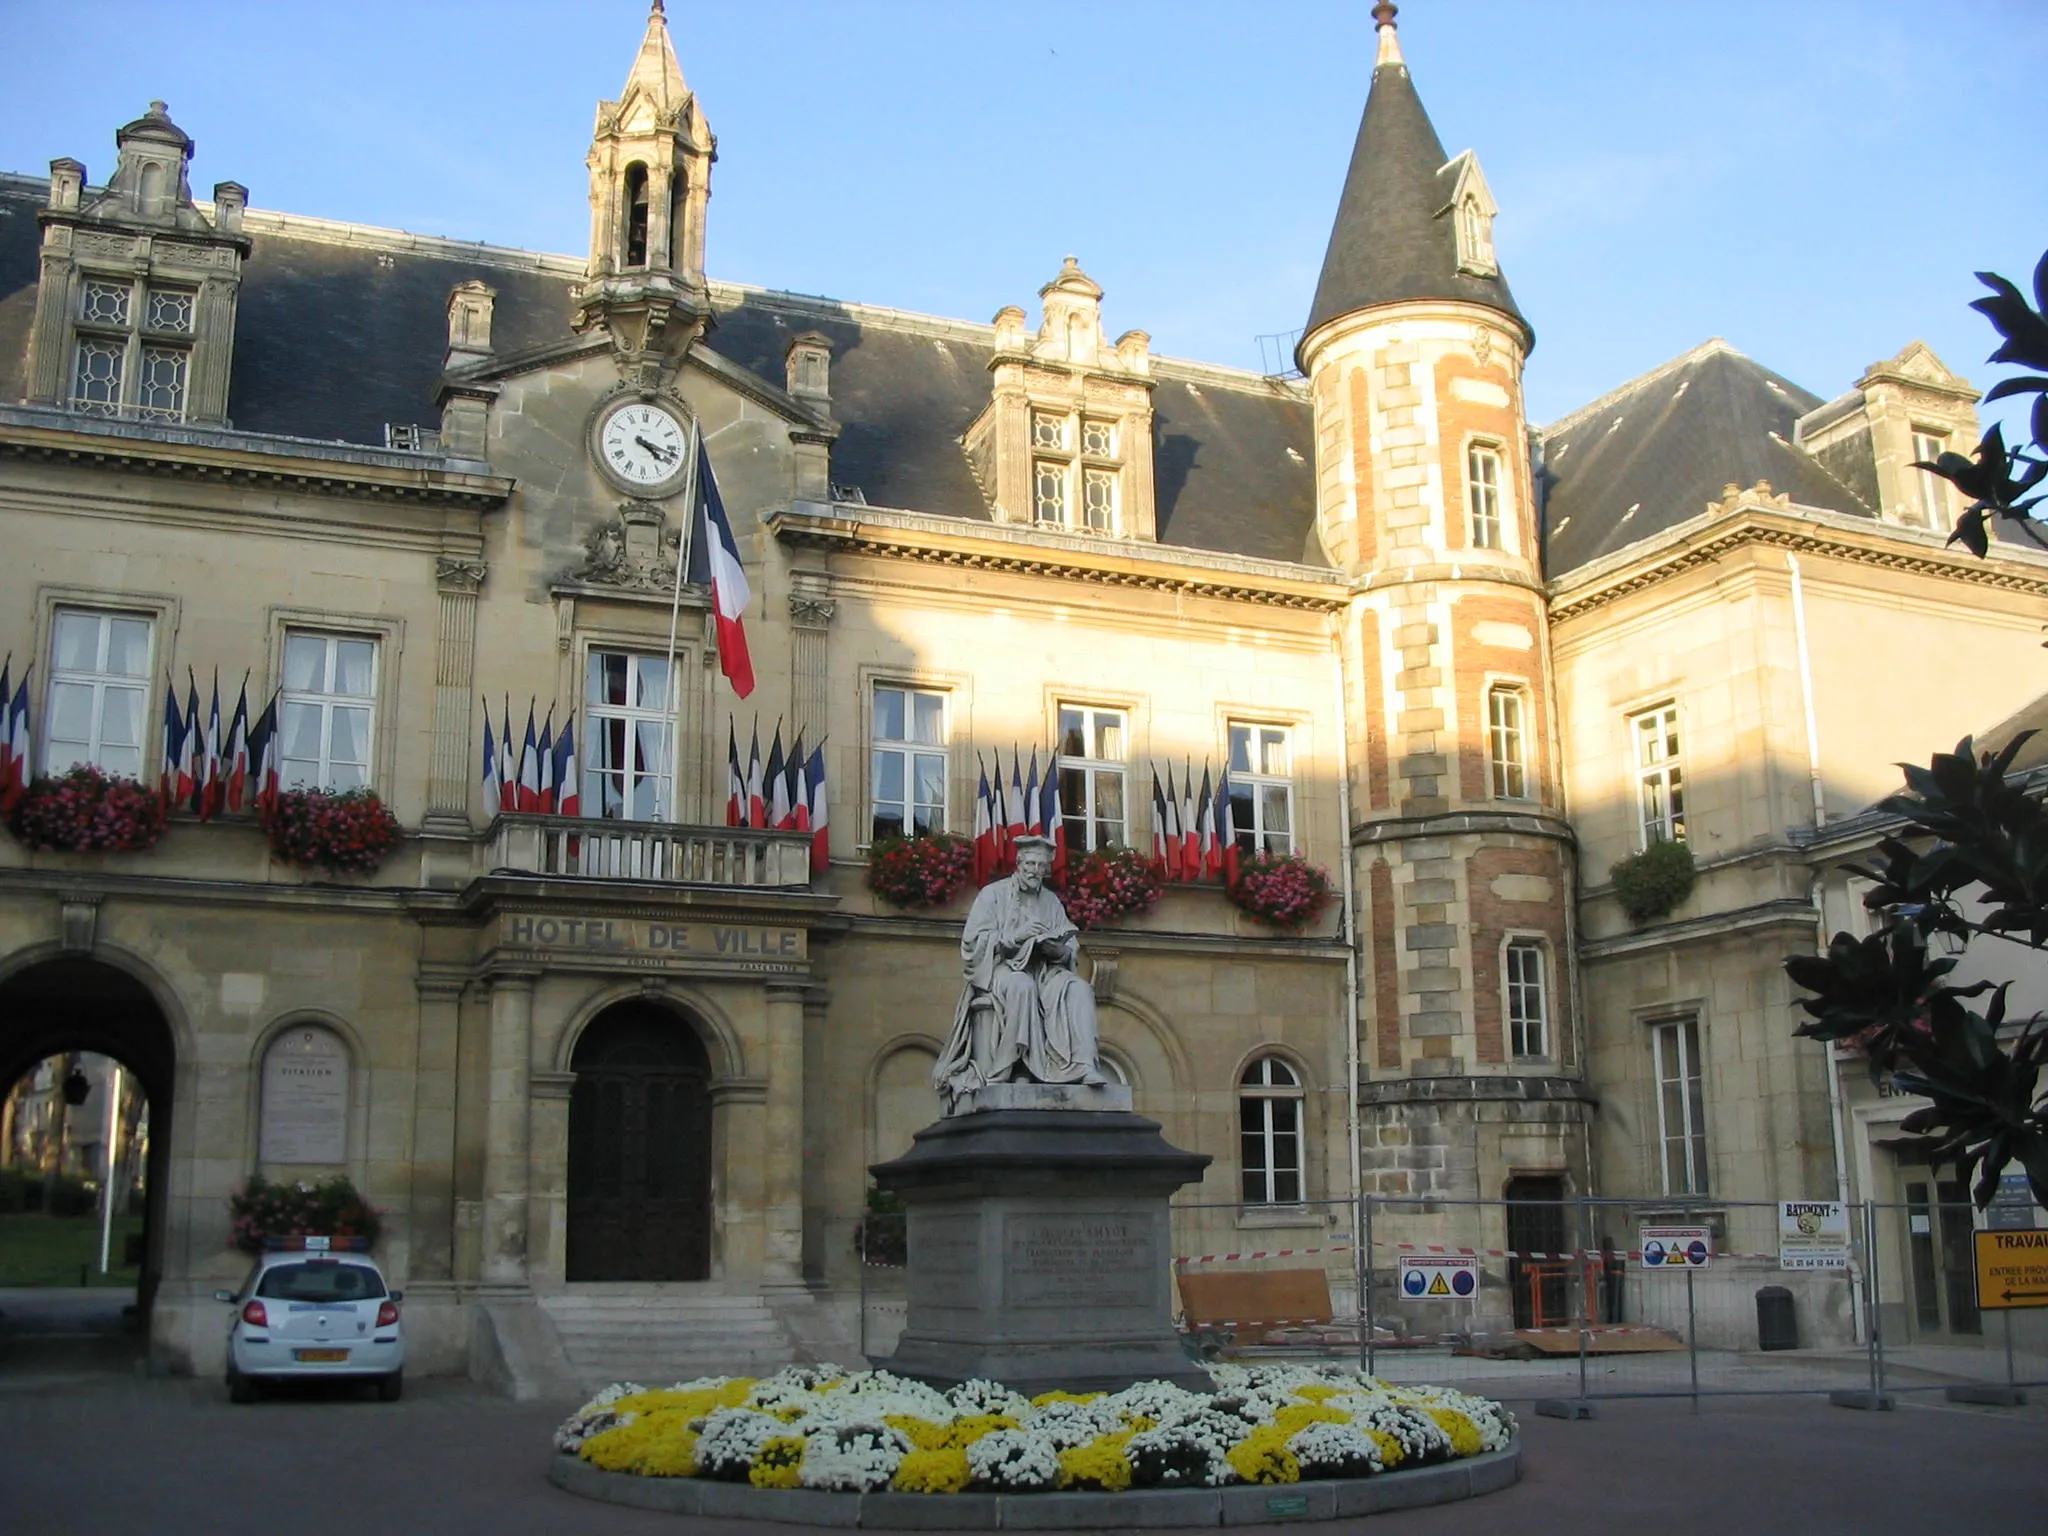 Photo showing: City hall of Melun (Seine-et-Marne, France) with a statue of Jacques Amyot.